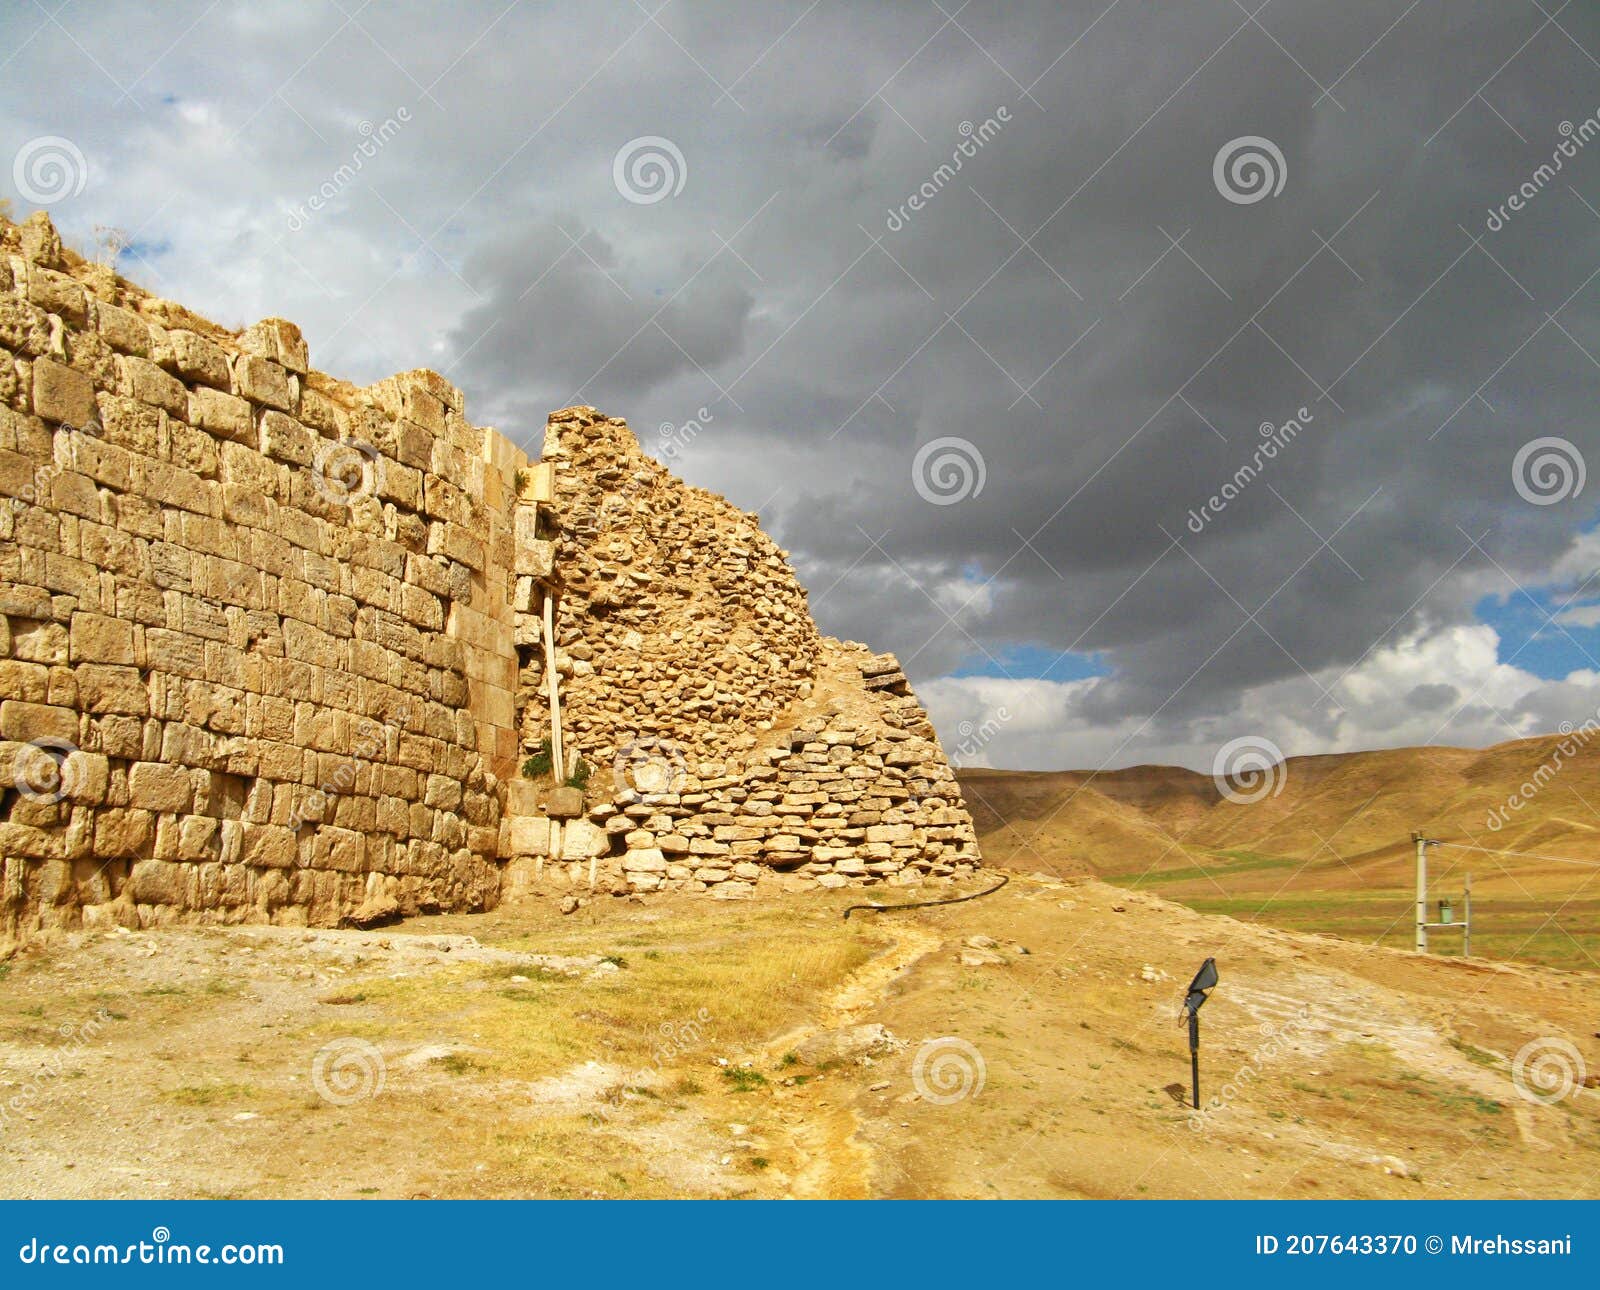 the wall of takht-e soleiman archaeological complex , unesco world heritage site in takab , iran